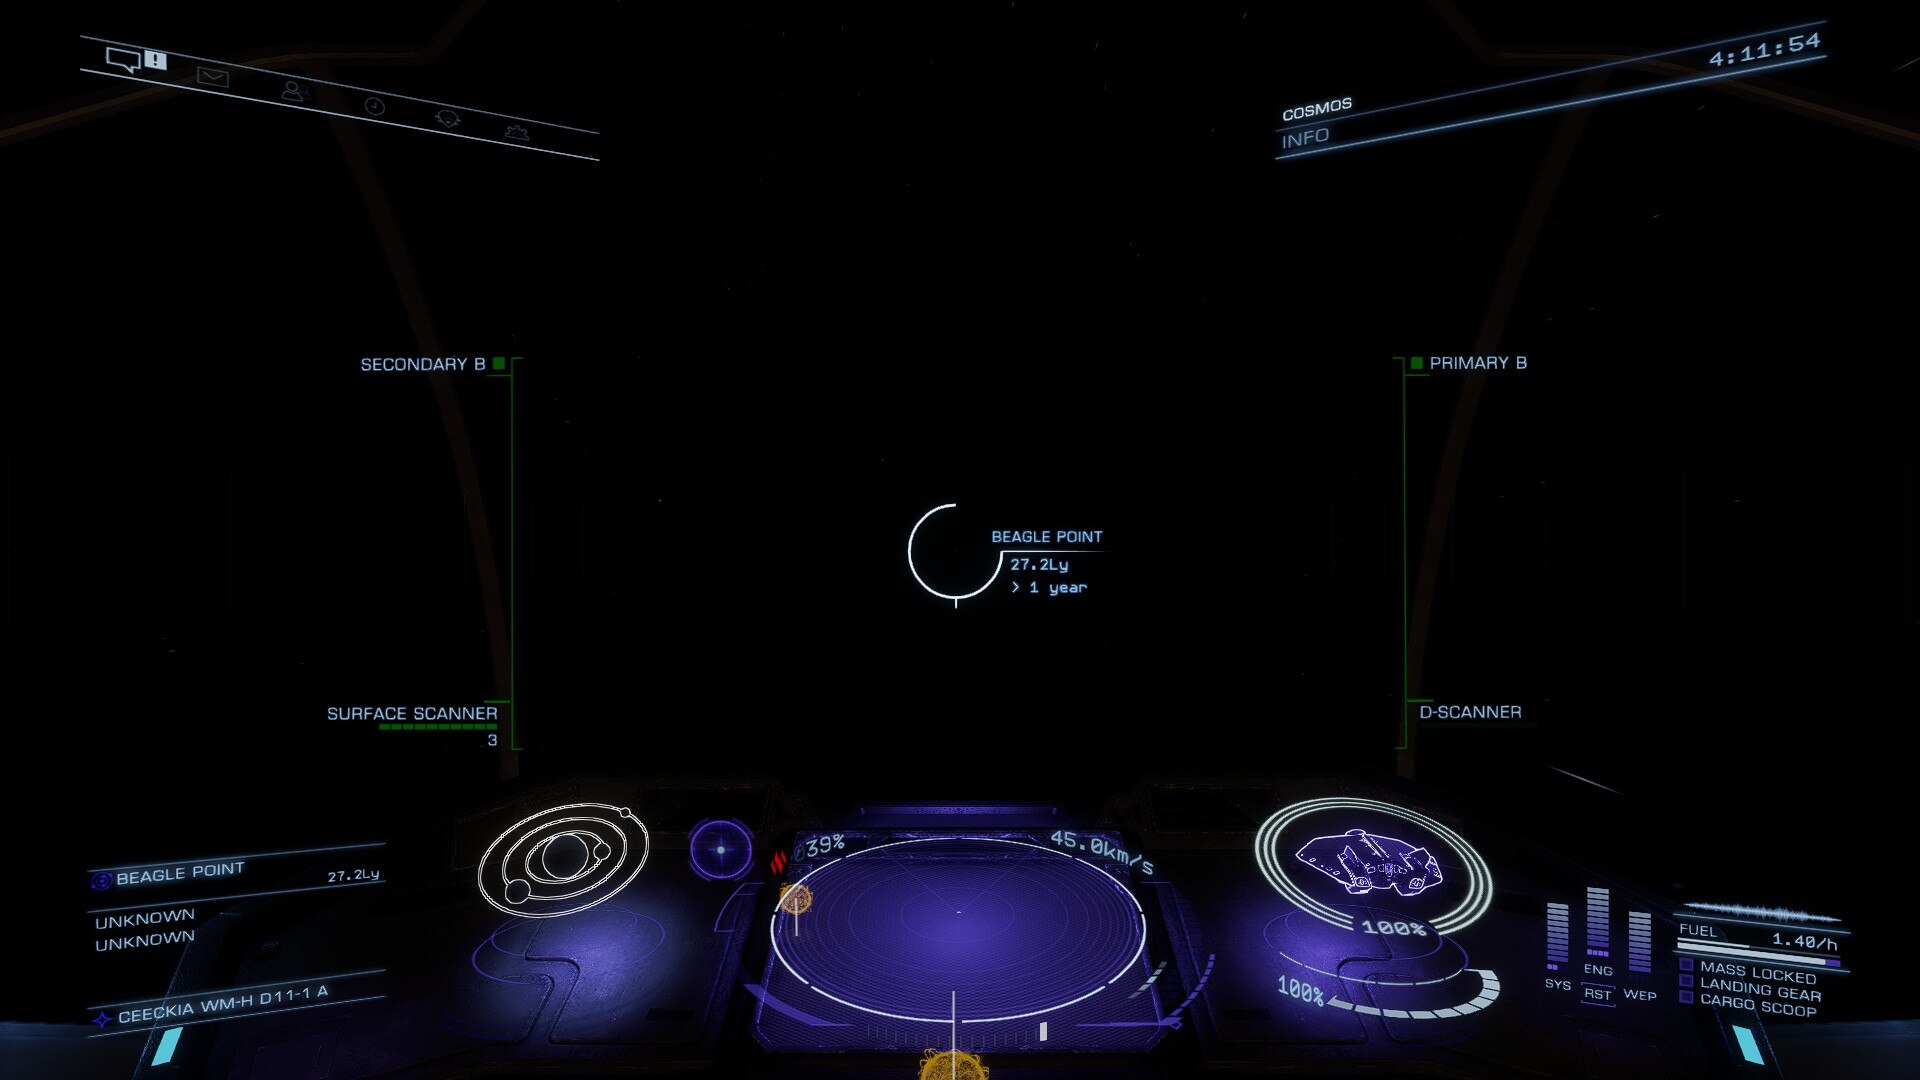 Jump to Beagle Point